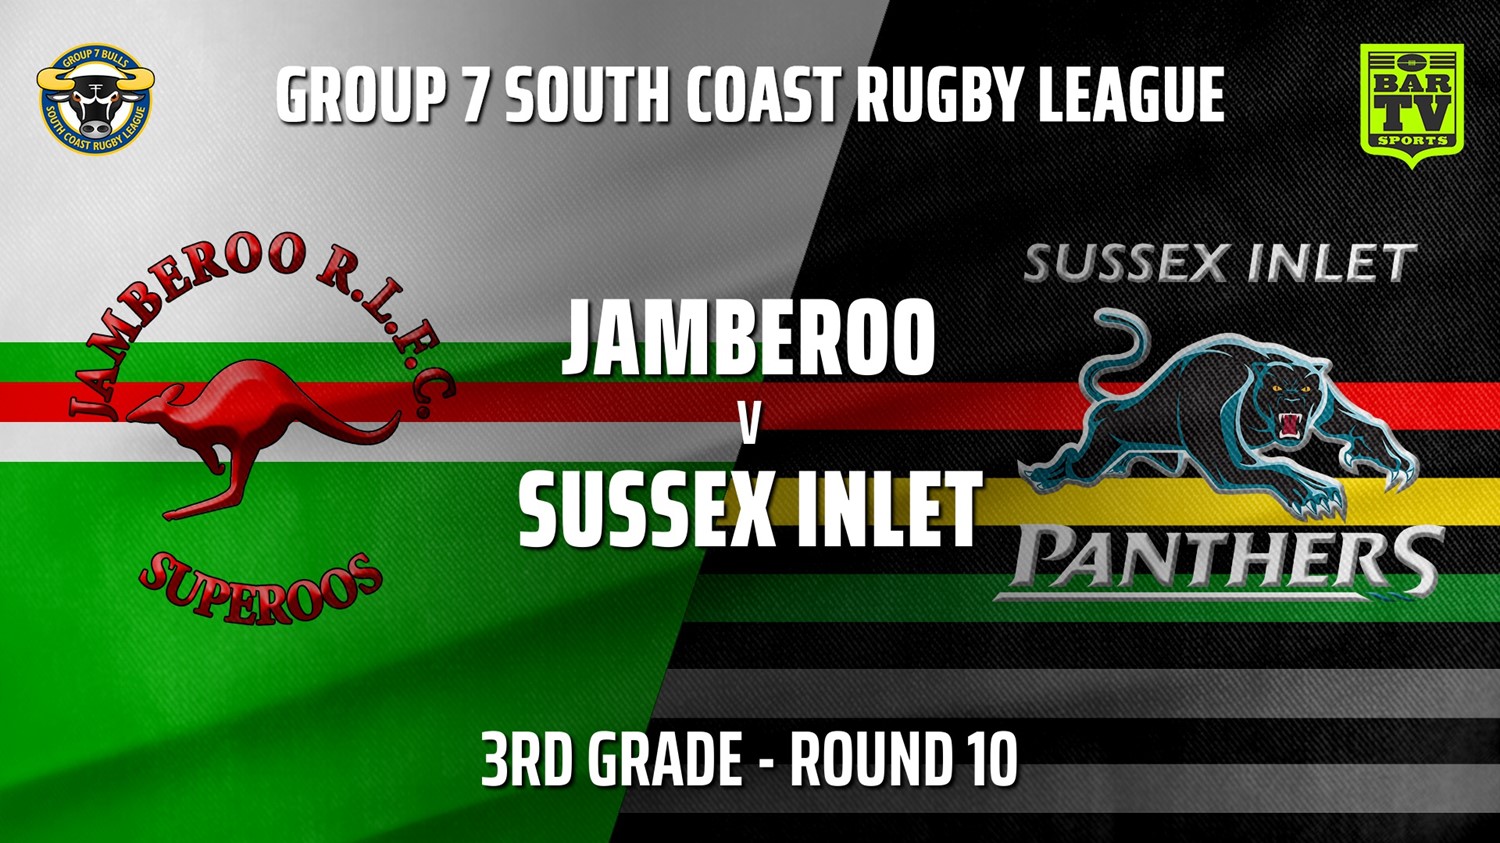 210619-South Coast Round 10 - 3rd Grade - Jamberoo v Sussex Inlet Panthers Slate Image